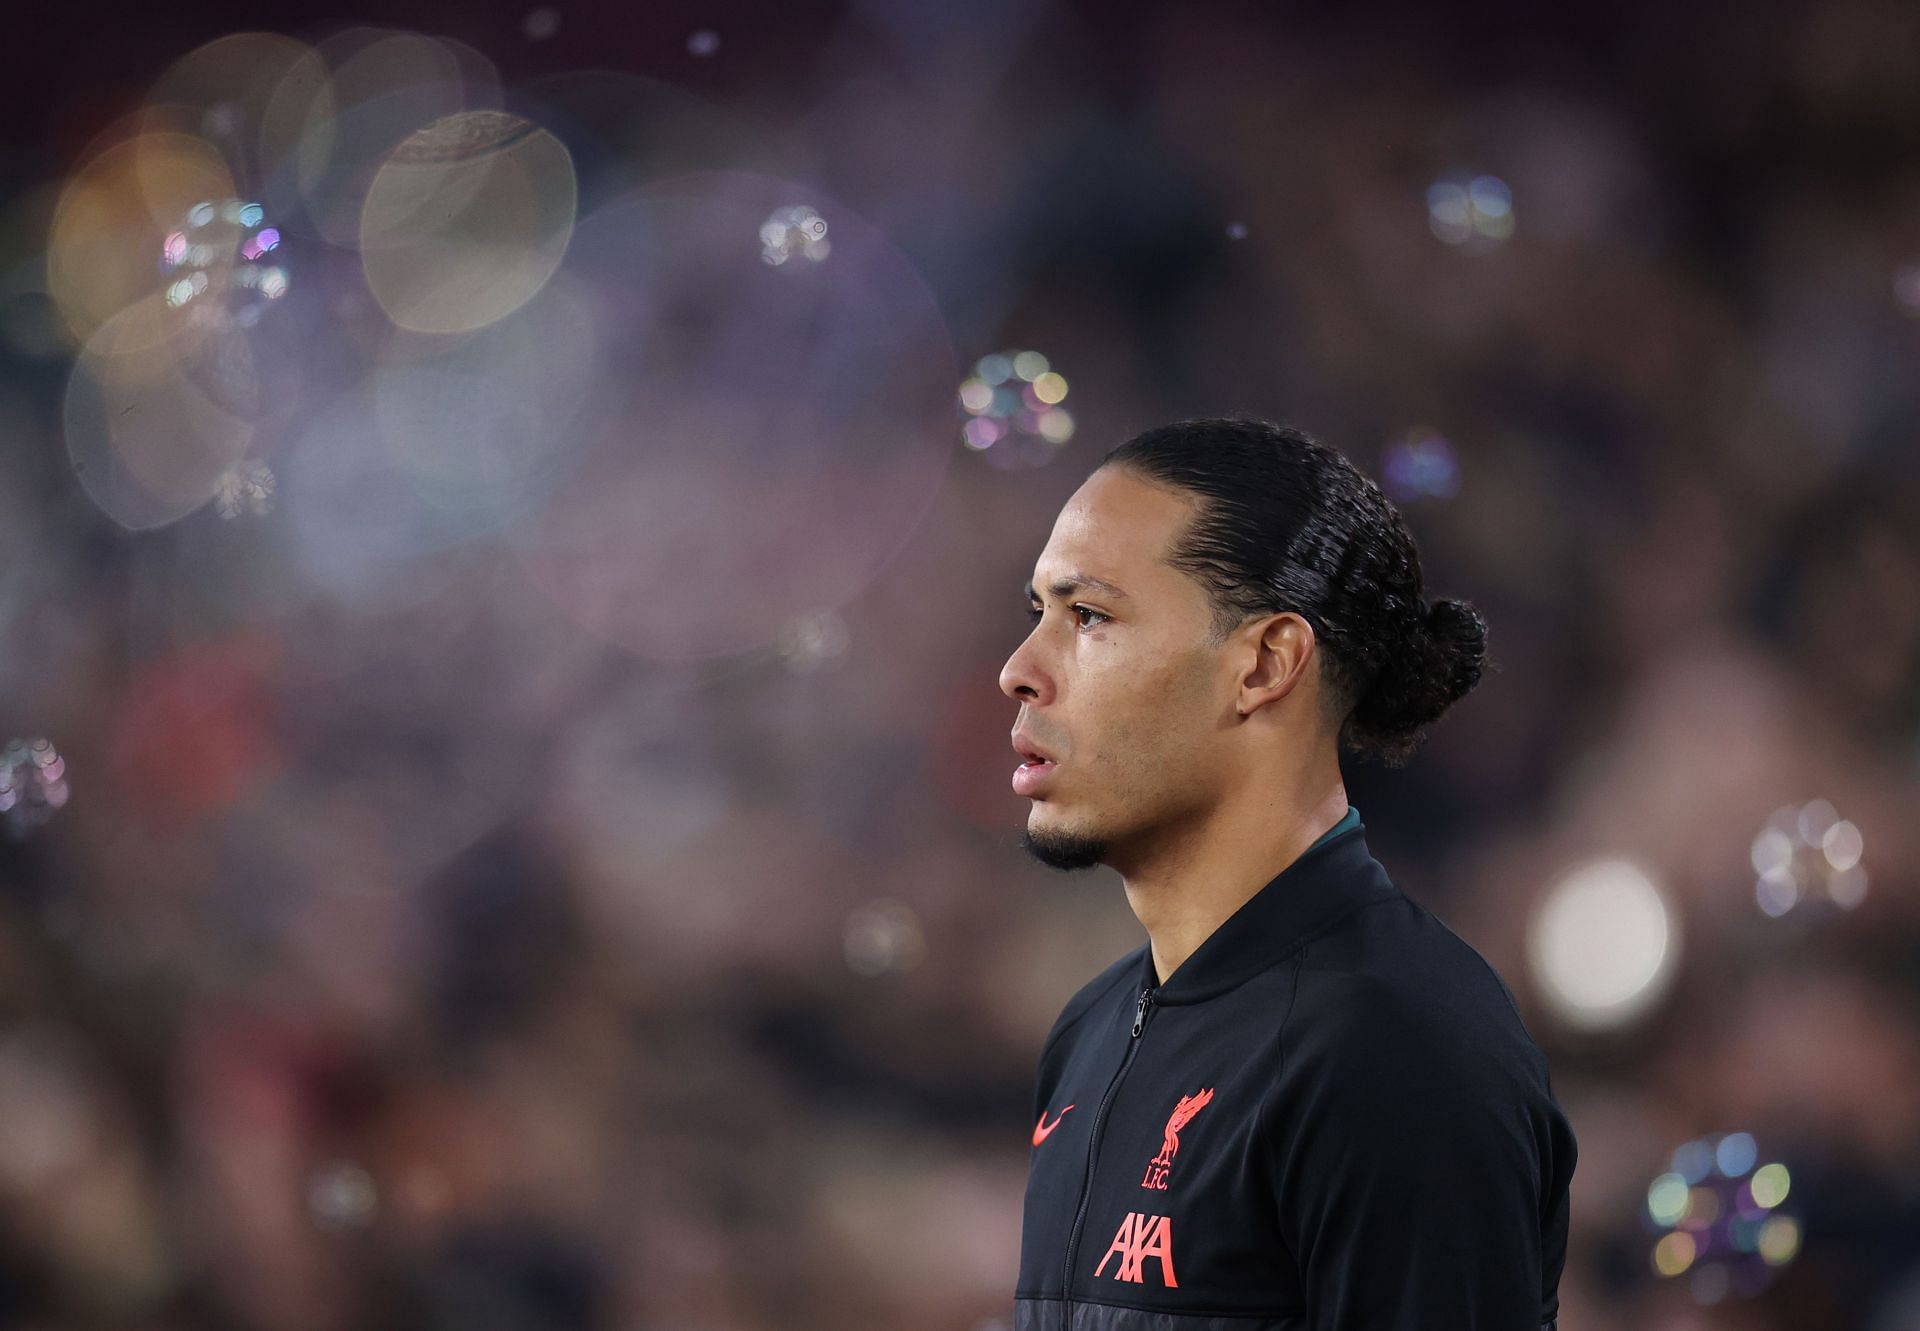 Carragher does not only target former Manchester United defenders but also current Liverpool players such as Van Dijk